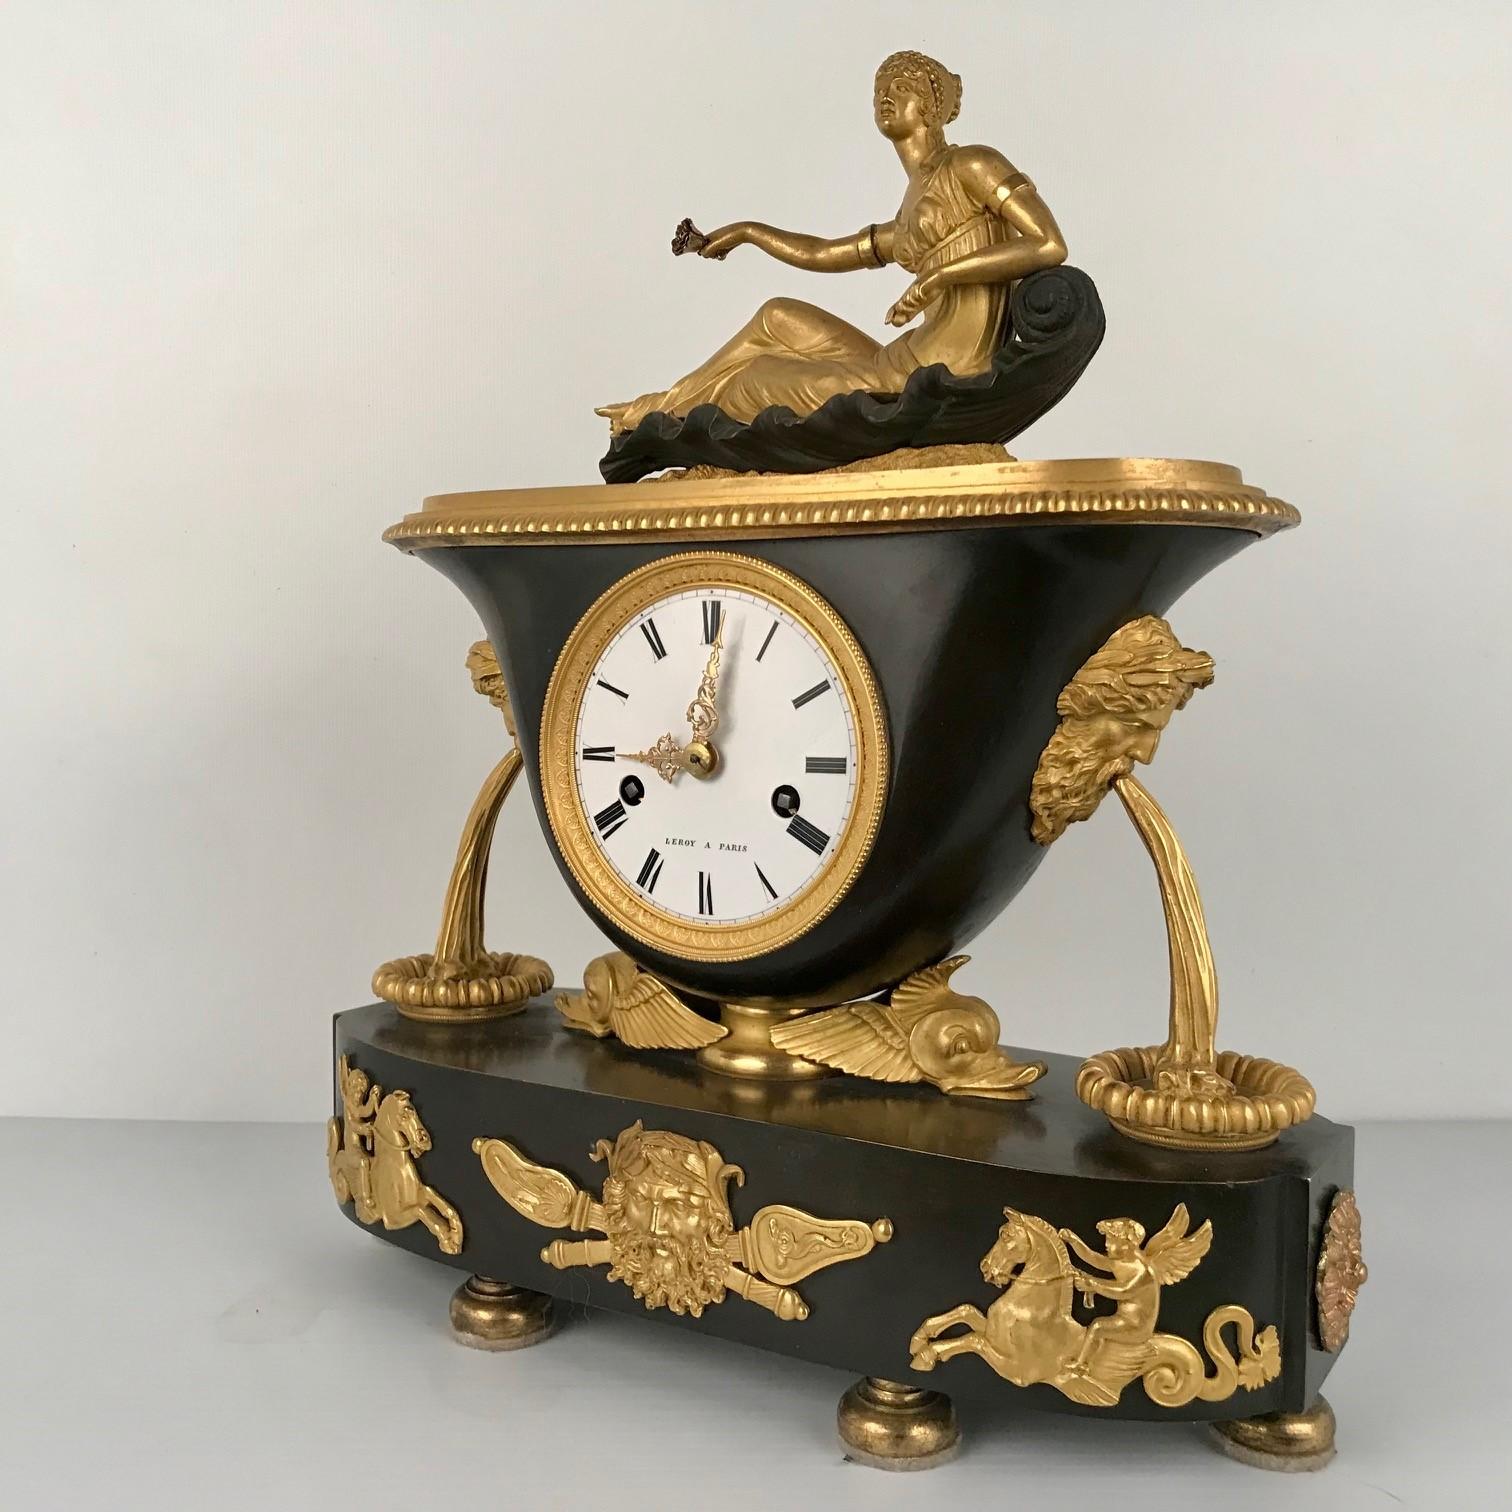 This mantle clock is by a well-respected Paris maker in a fashionable style. The oval base supports a vase shaped clock case in turn supported by winged dolphin heads and flanked by stylised fountains. The top of the clock is modeled as a young